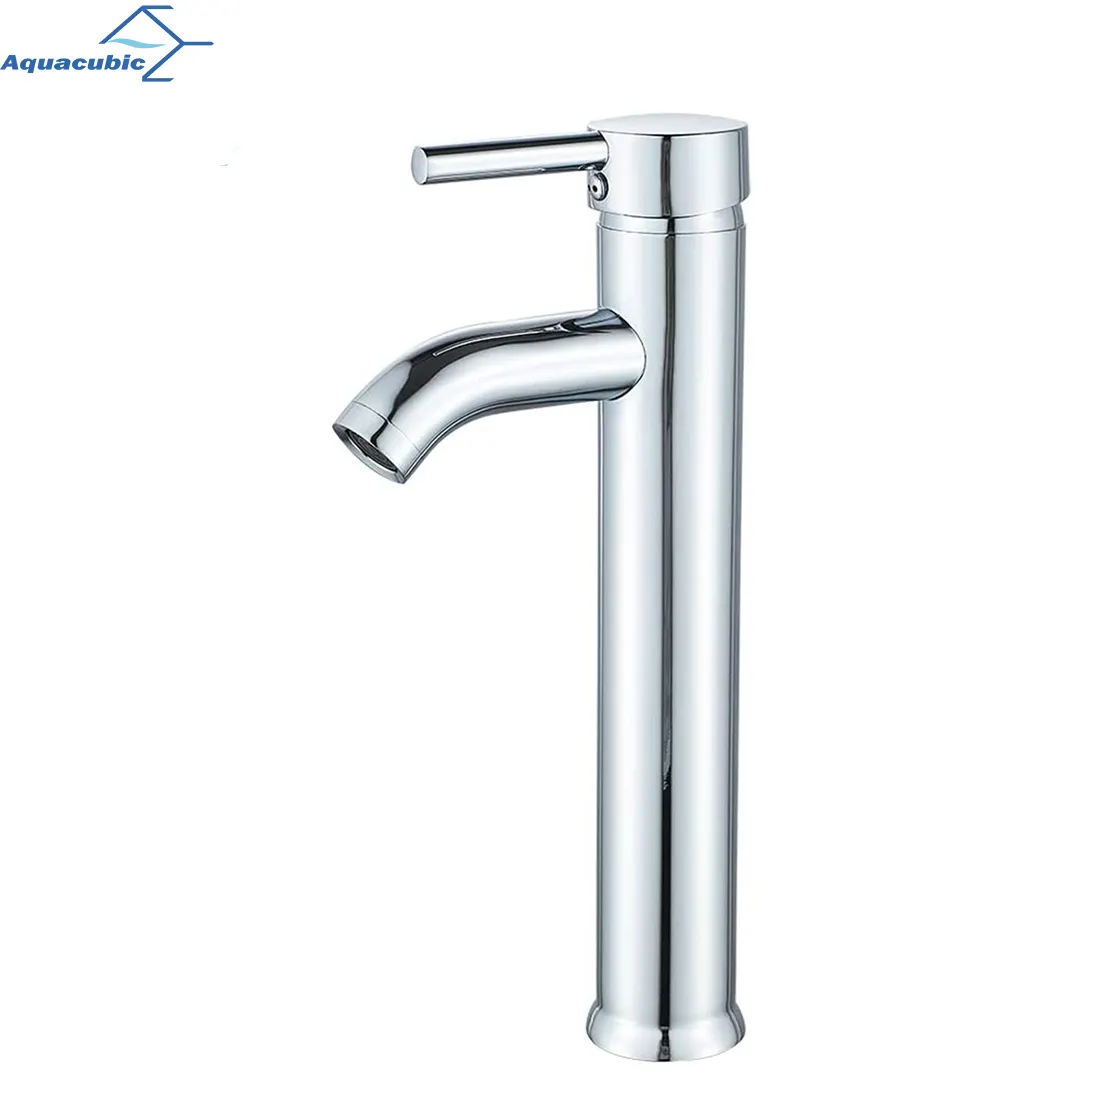 Modern cUPC Luxury Chrome Low-lead Brass Body Single Handle Bathroom Faucet with One hole